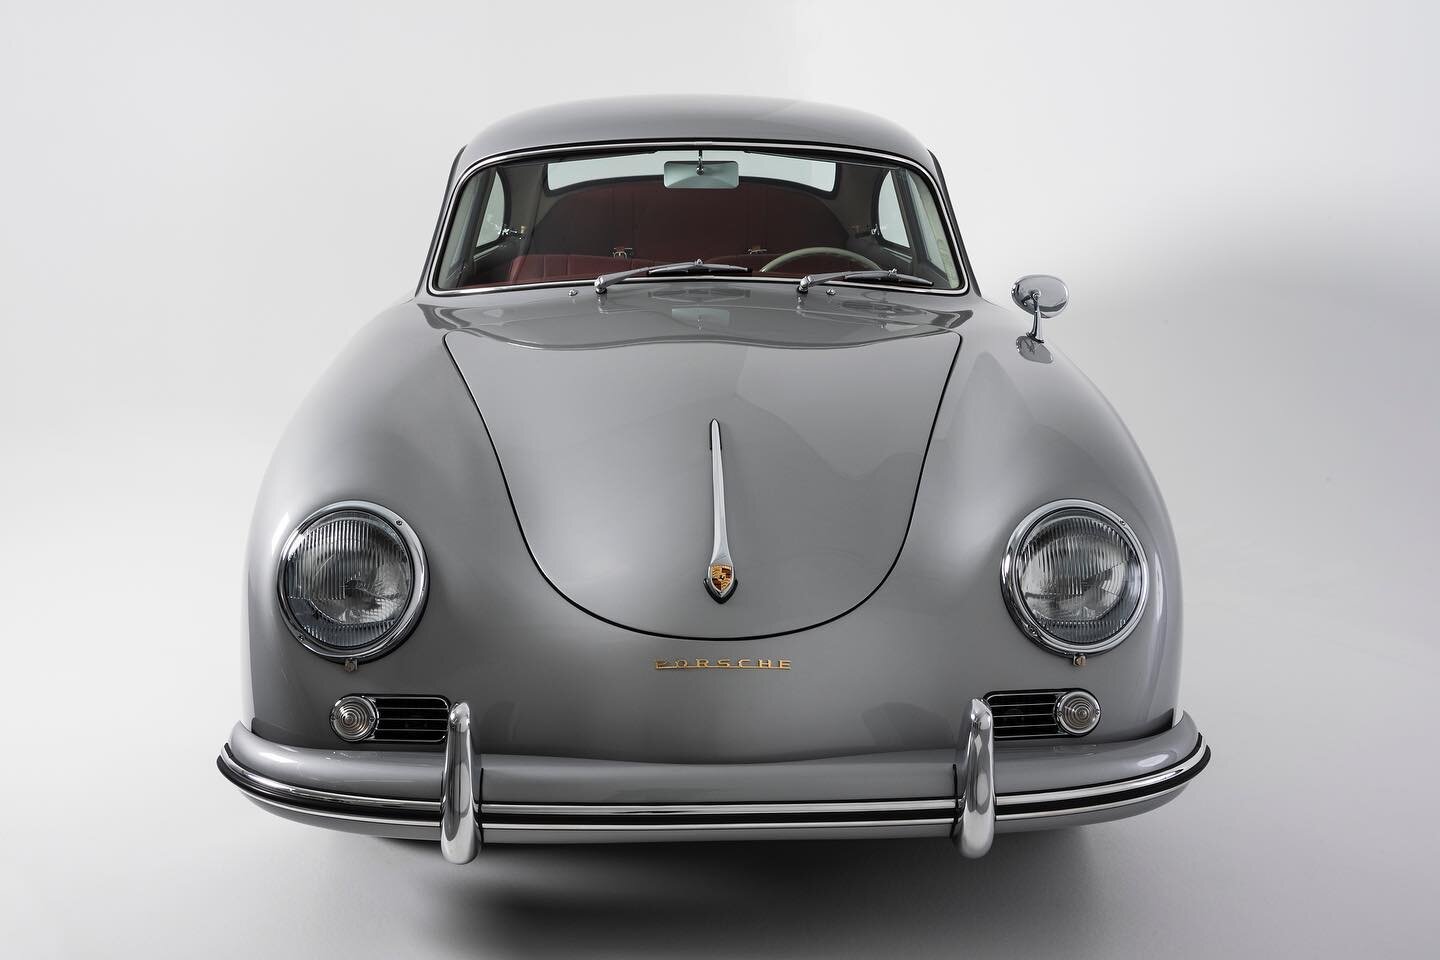 This 1956 Porsche 356 we previously restored for a customer is available for purchase. Visit the website under &ldquo;Available Cars&rdquo; for more information. #Porsche #PorscheUSA #ClassicPorsche #Porsche356 #Porsche356A